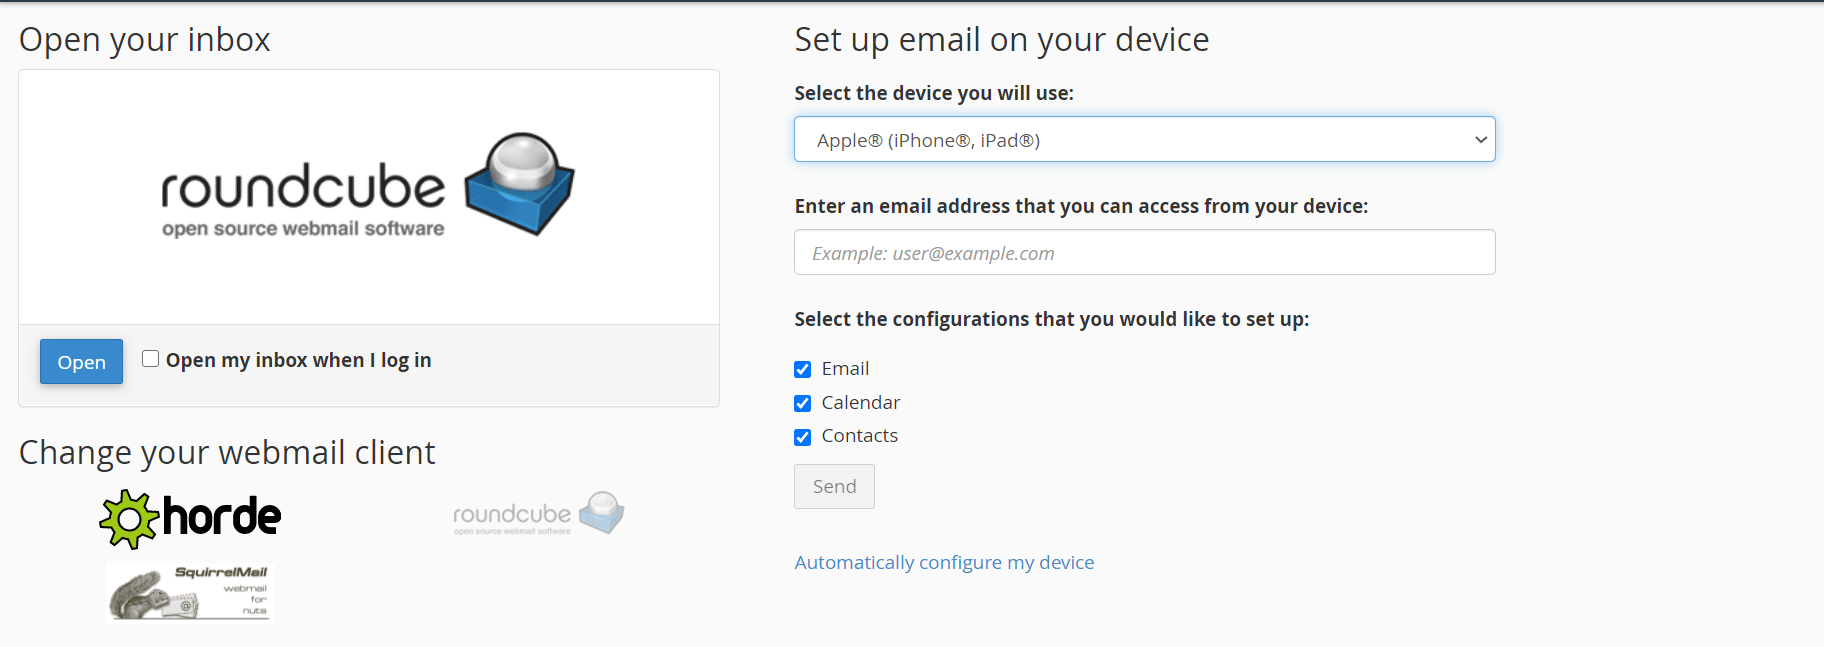 Choosing how to receive email via Bluehost.